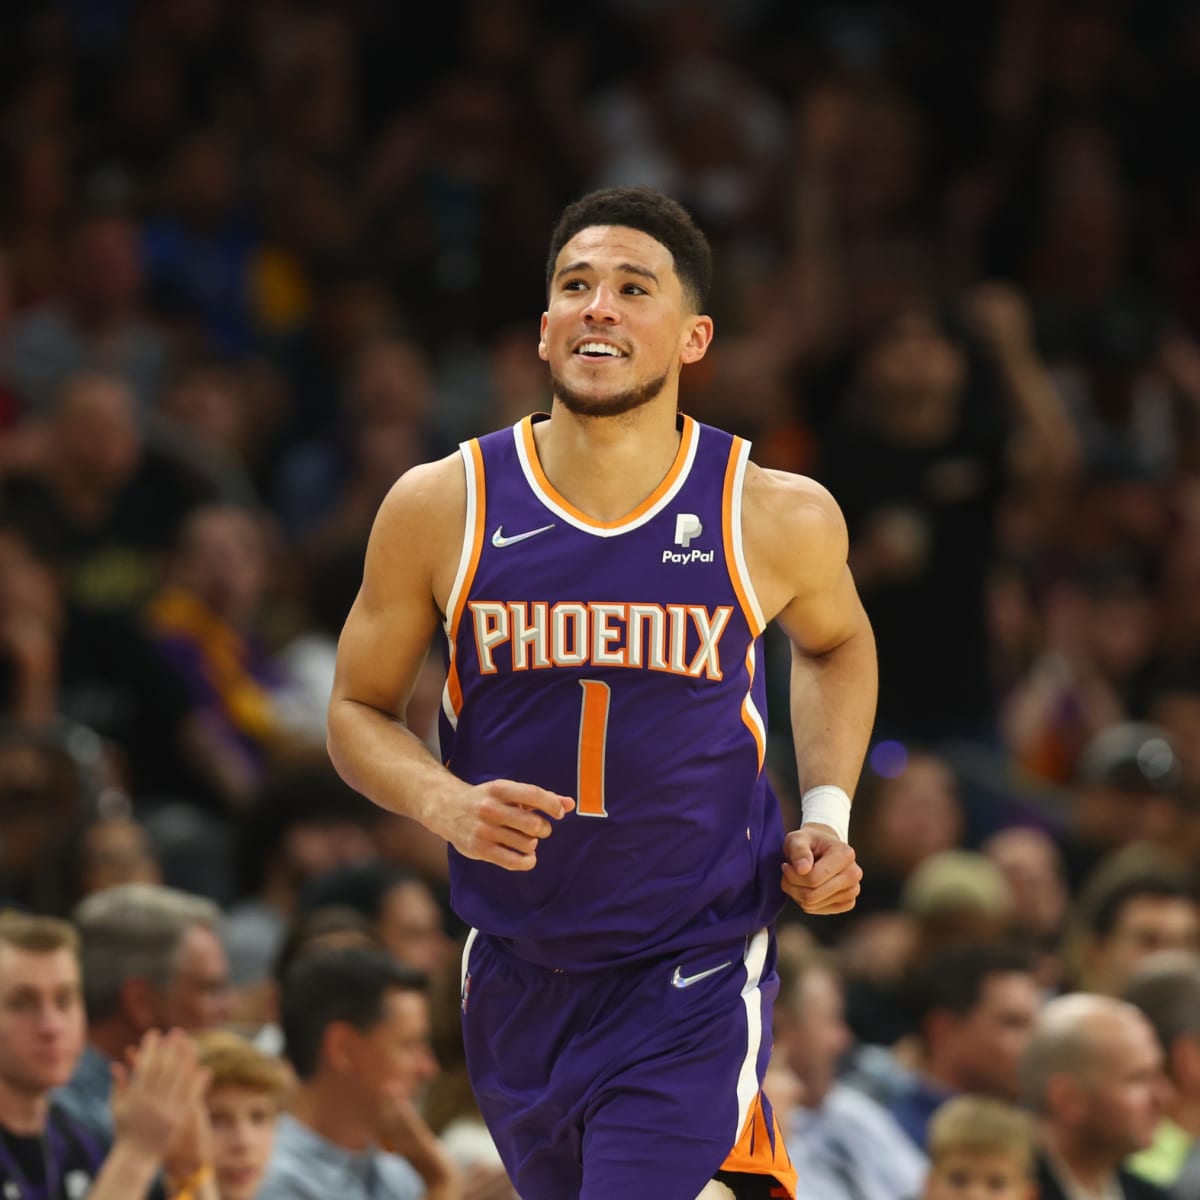 Phoenix Suns SG Devin Booker Getting Signature Nike Shoe - Sports  Illustrated Inside The Suns News, Analysis and More